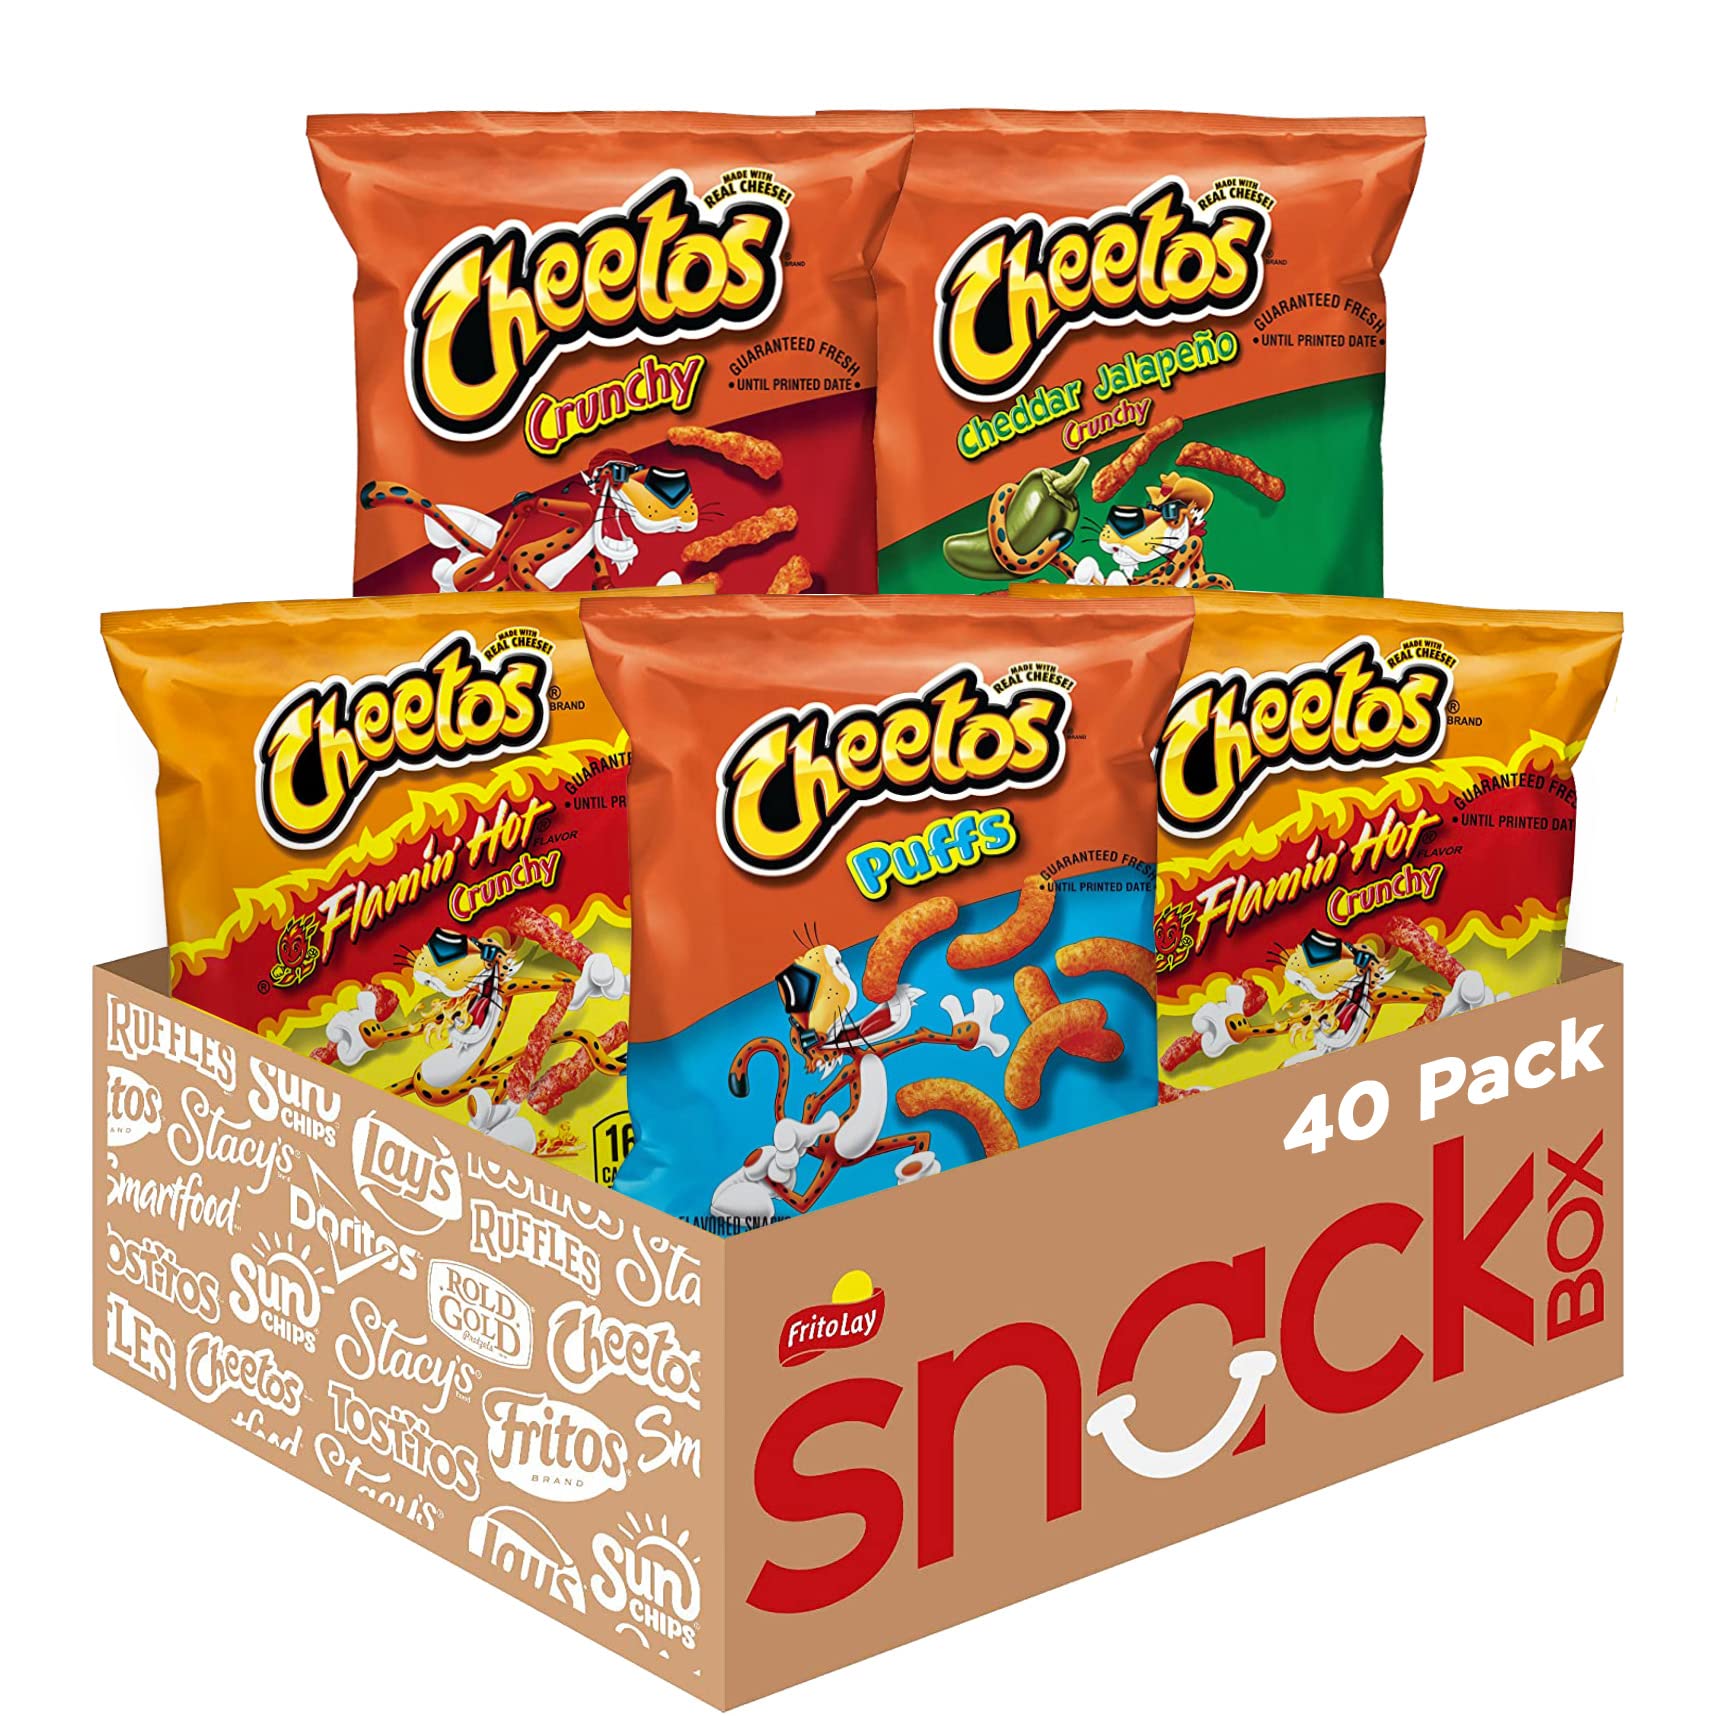 Buy Cheetos Cheese Flavored Snacks Variety Pack, (Pack of 40) | Fado168